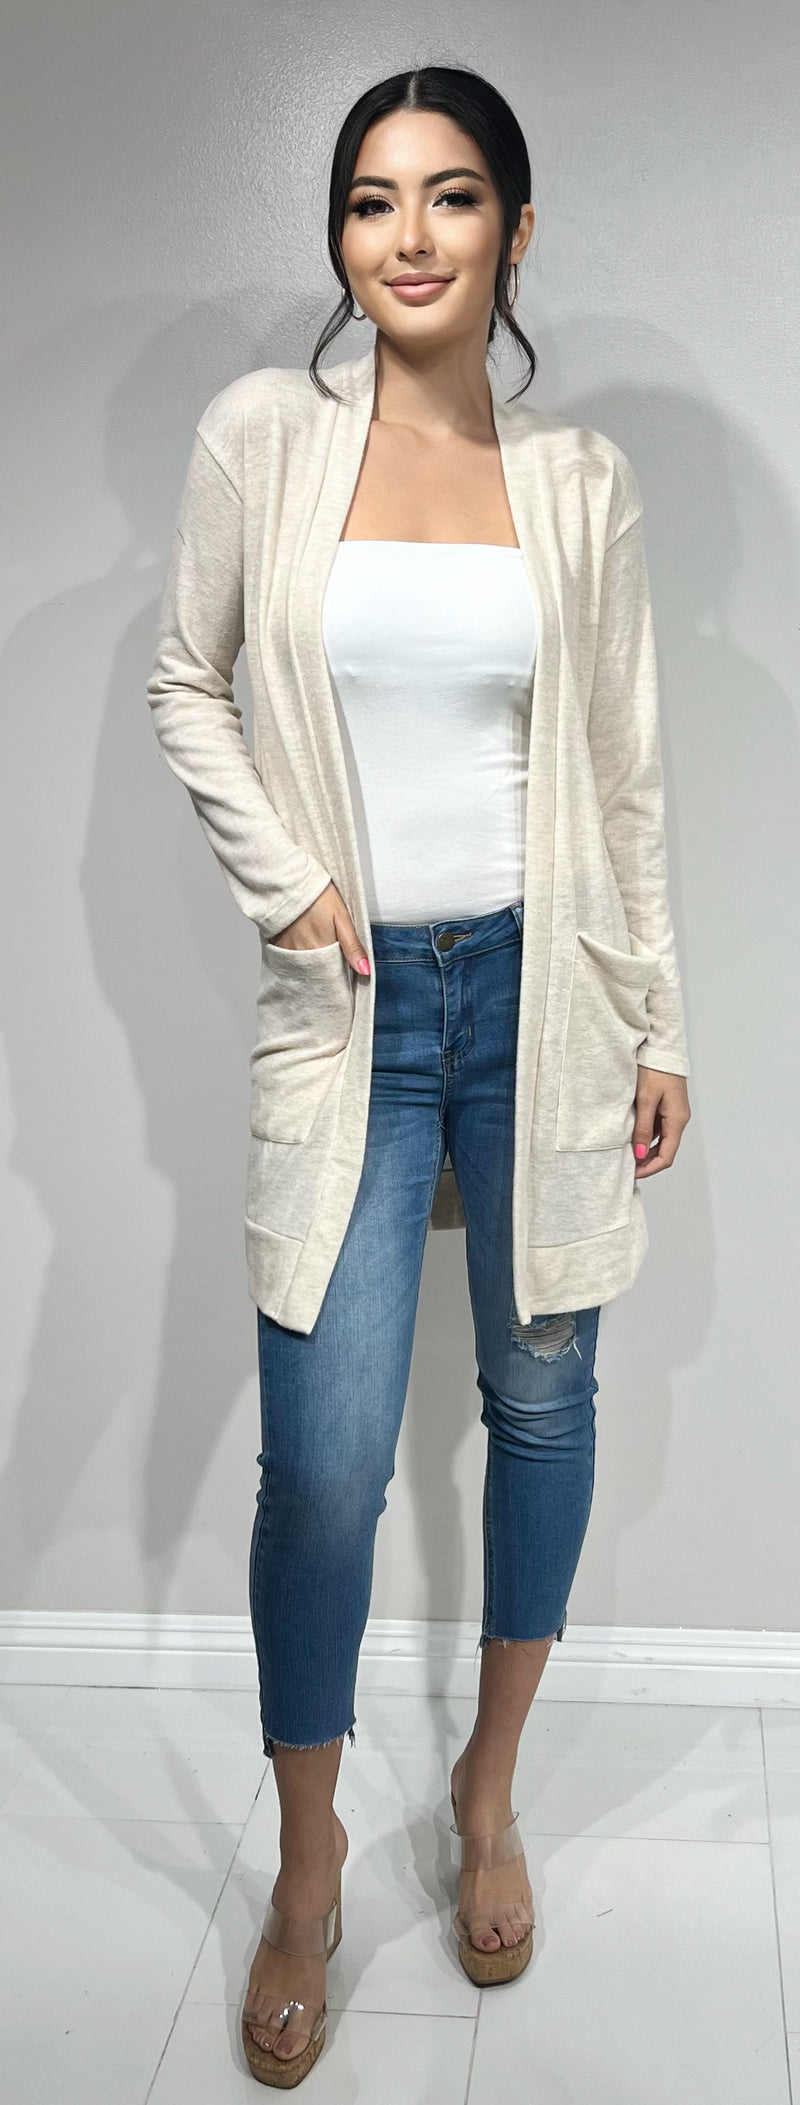 Jeans Warehouse Hawaii - CARDIGANS - LONG CARDIGAN WITH POCKETS | By CHERISH